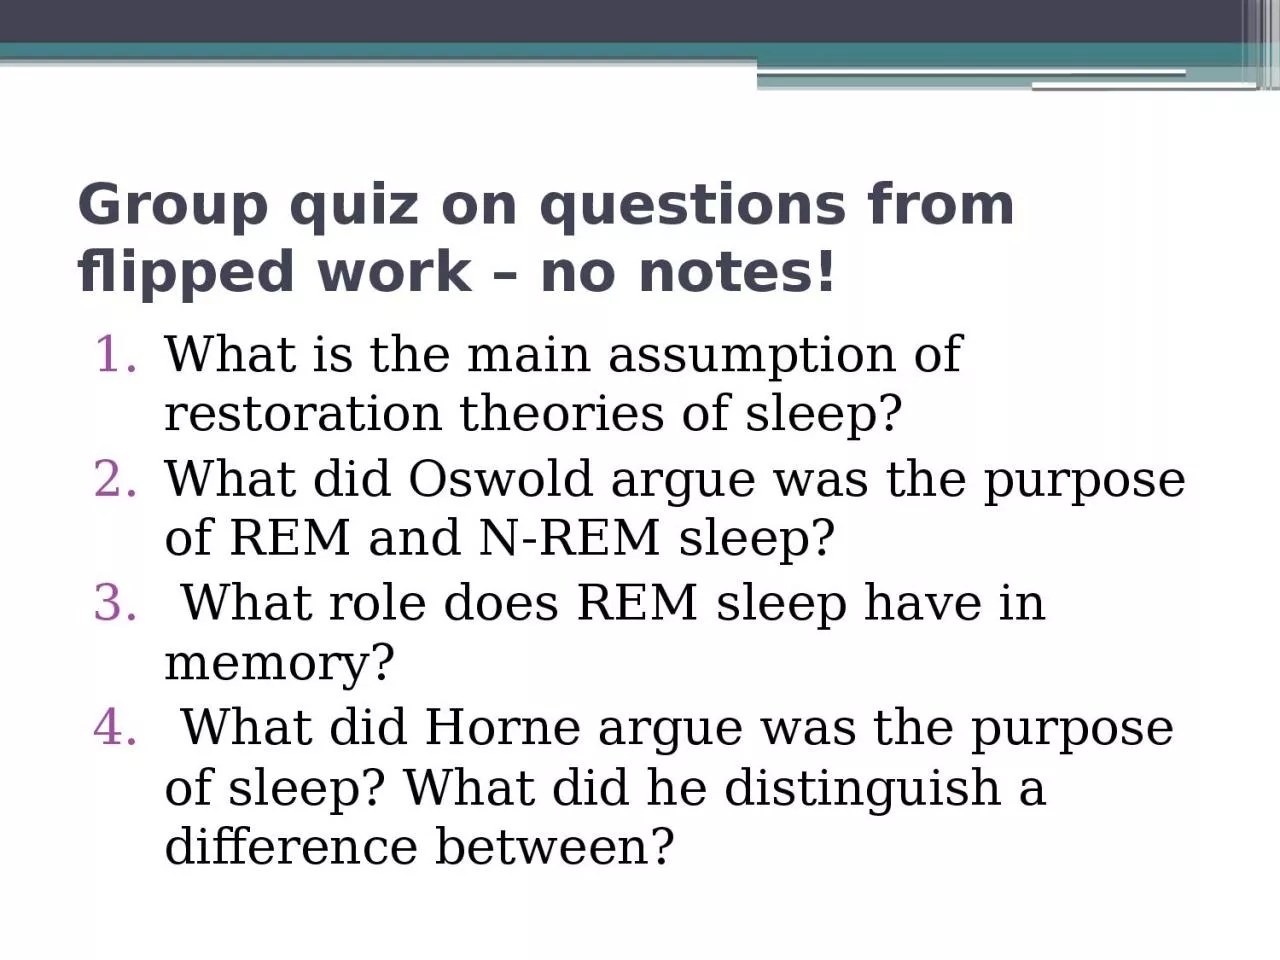 Group quiz on questions from flipped work – no notes!